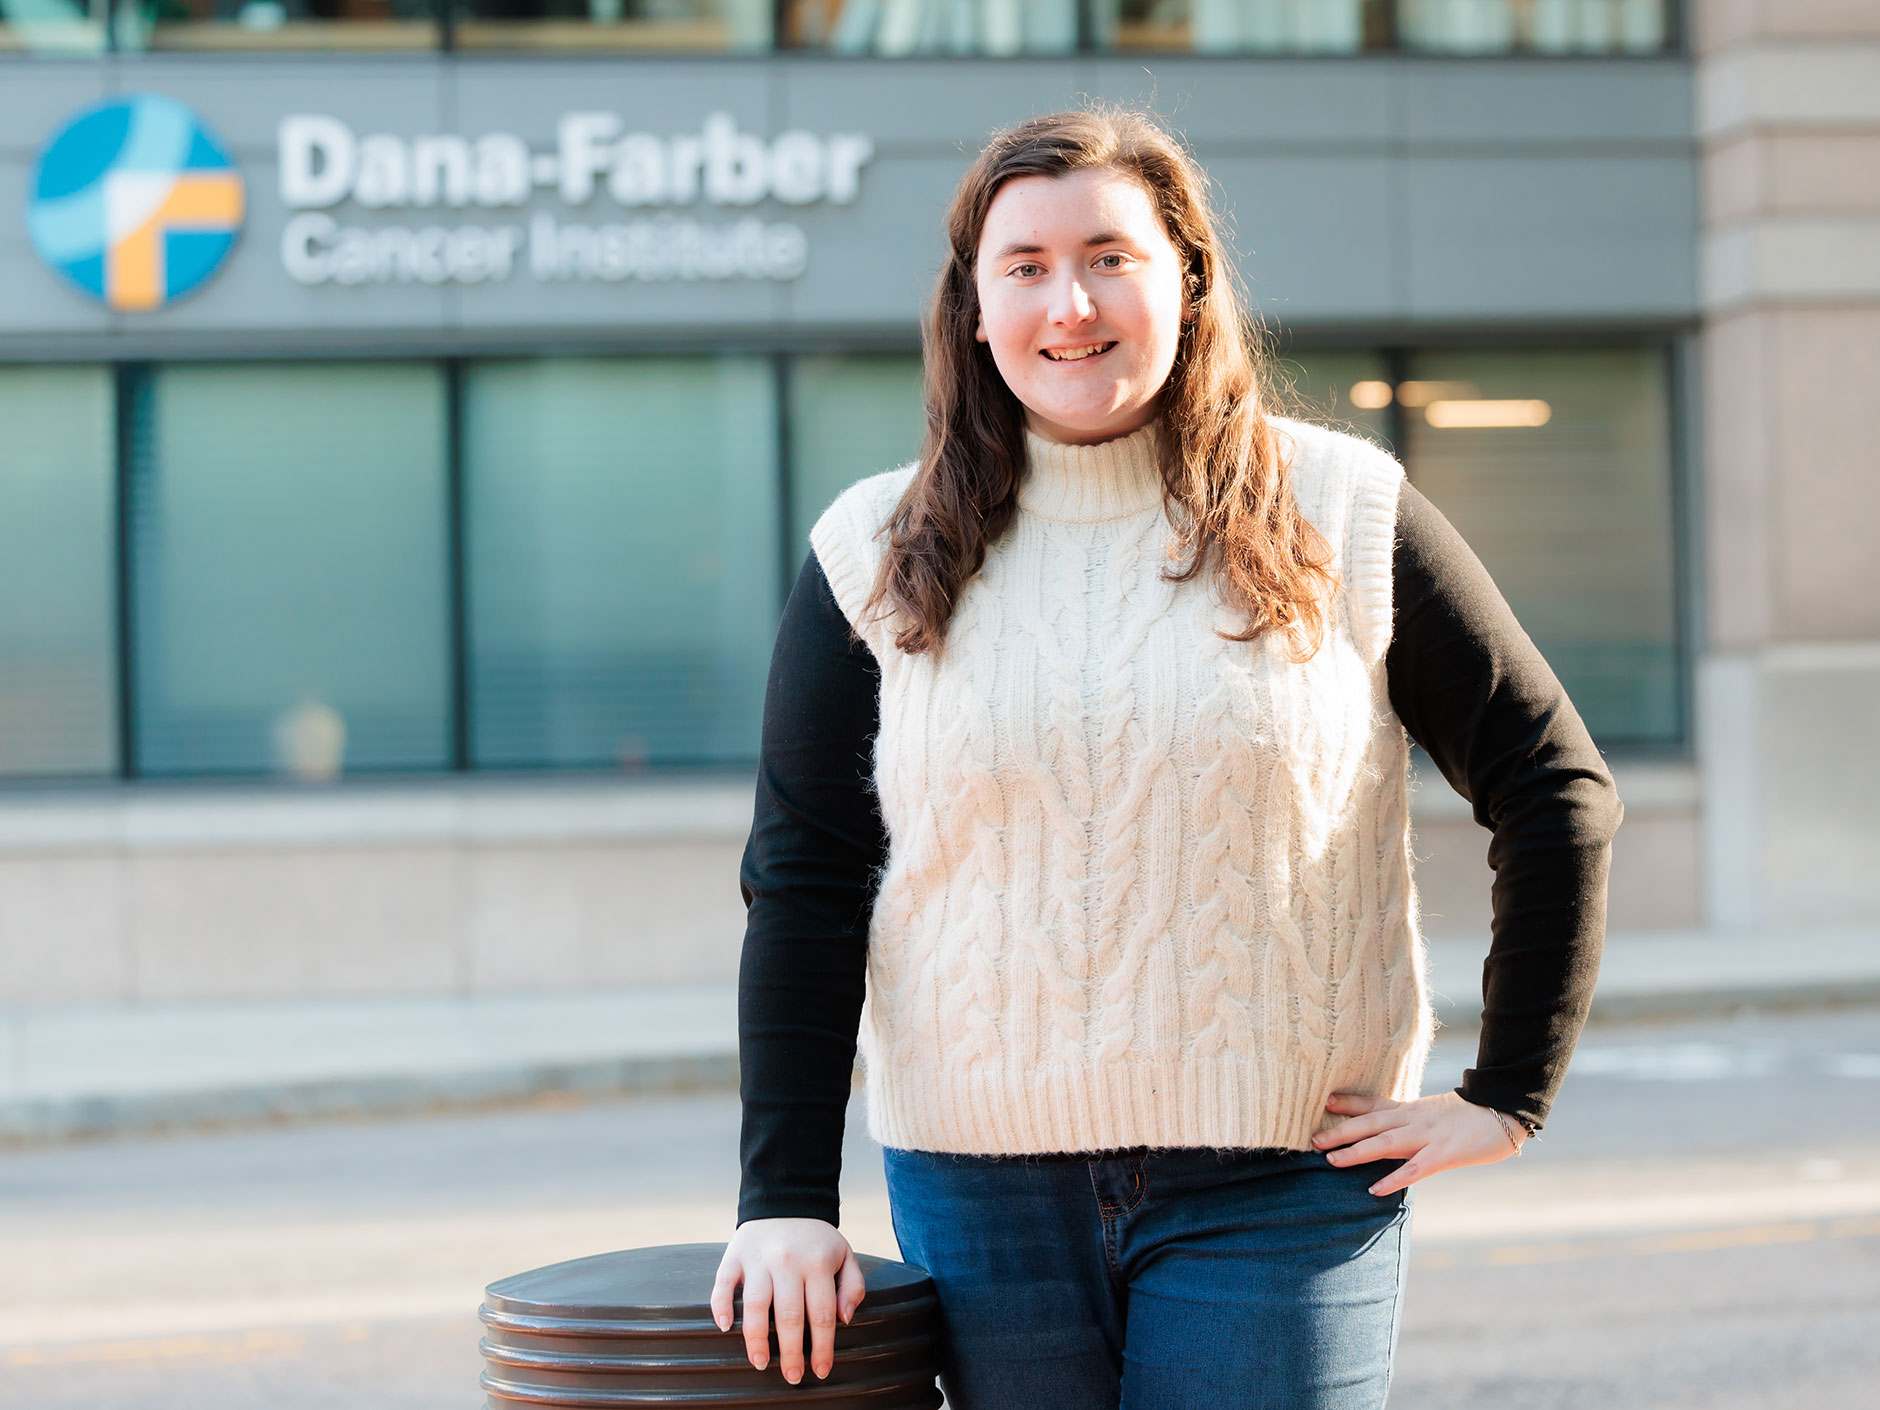 In her semester internship with Dana-Farber Cancer Institute, Endicott College interior architecture major Samantha Stewart ’24 is designing creative and calming spaces for patients.